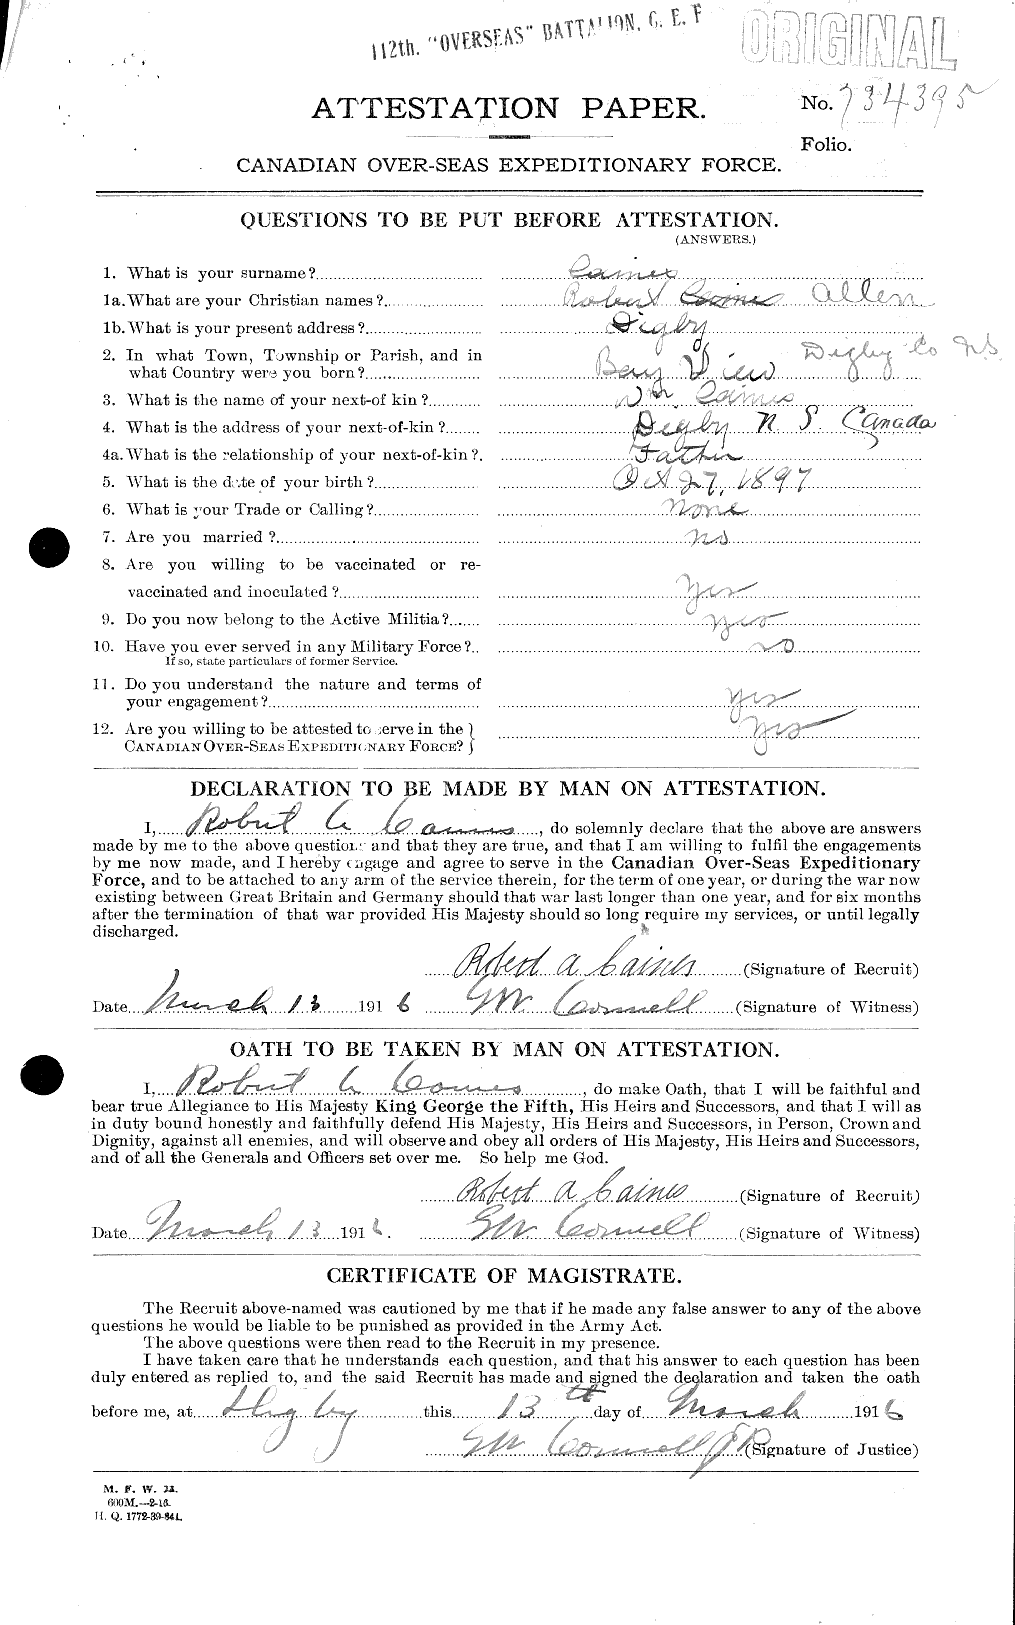 Personnel Records of the First World War - CEF 000402a